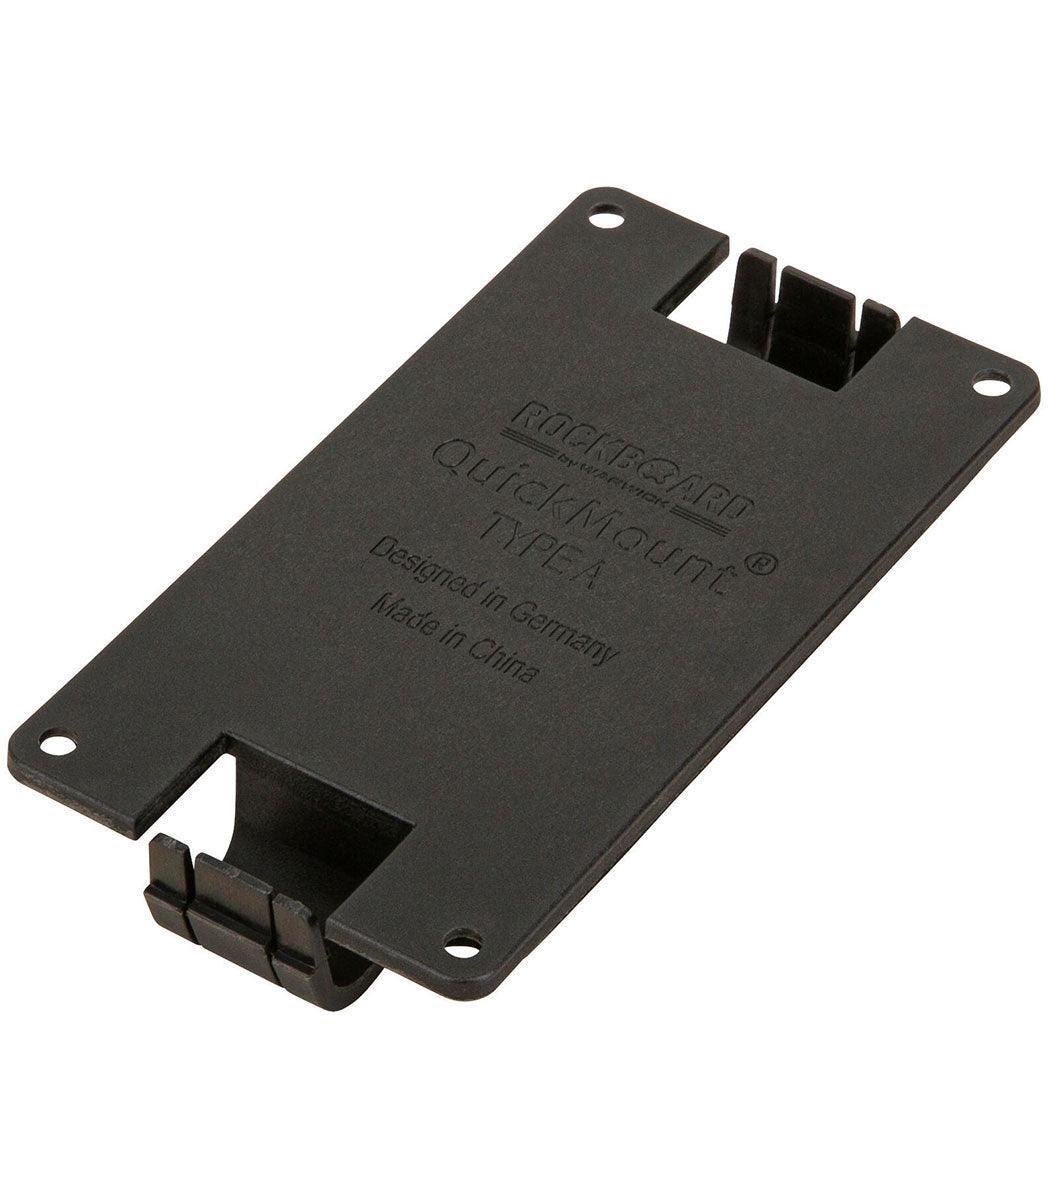 RockBoard QuickMount for EHX Nano and MXR Standard Pedals - Pedal Boards - Accessories by Rockboard at Muso's Stuff